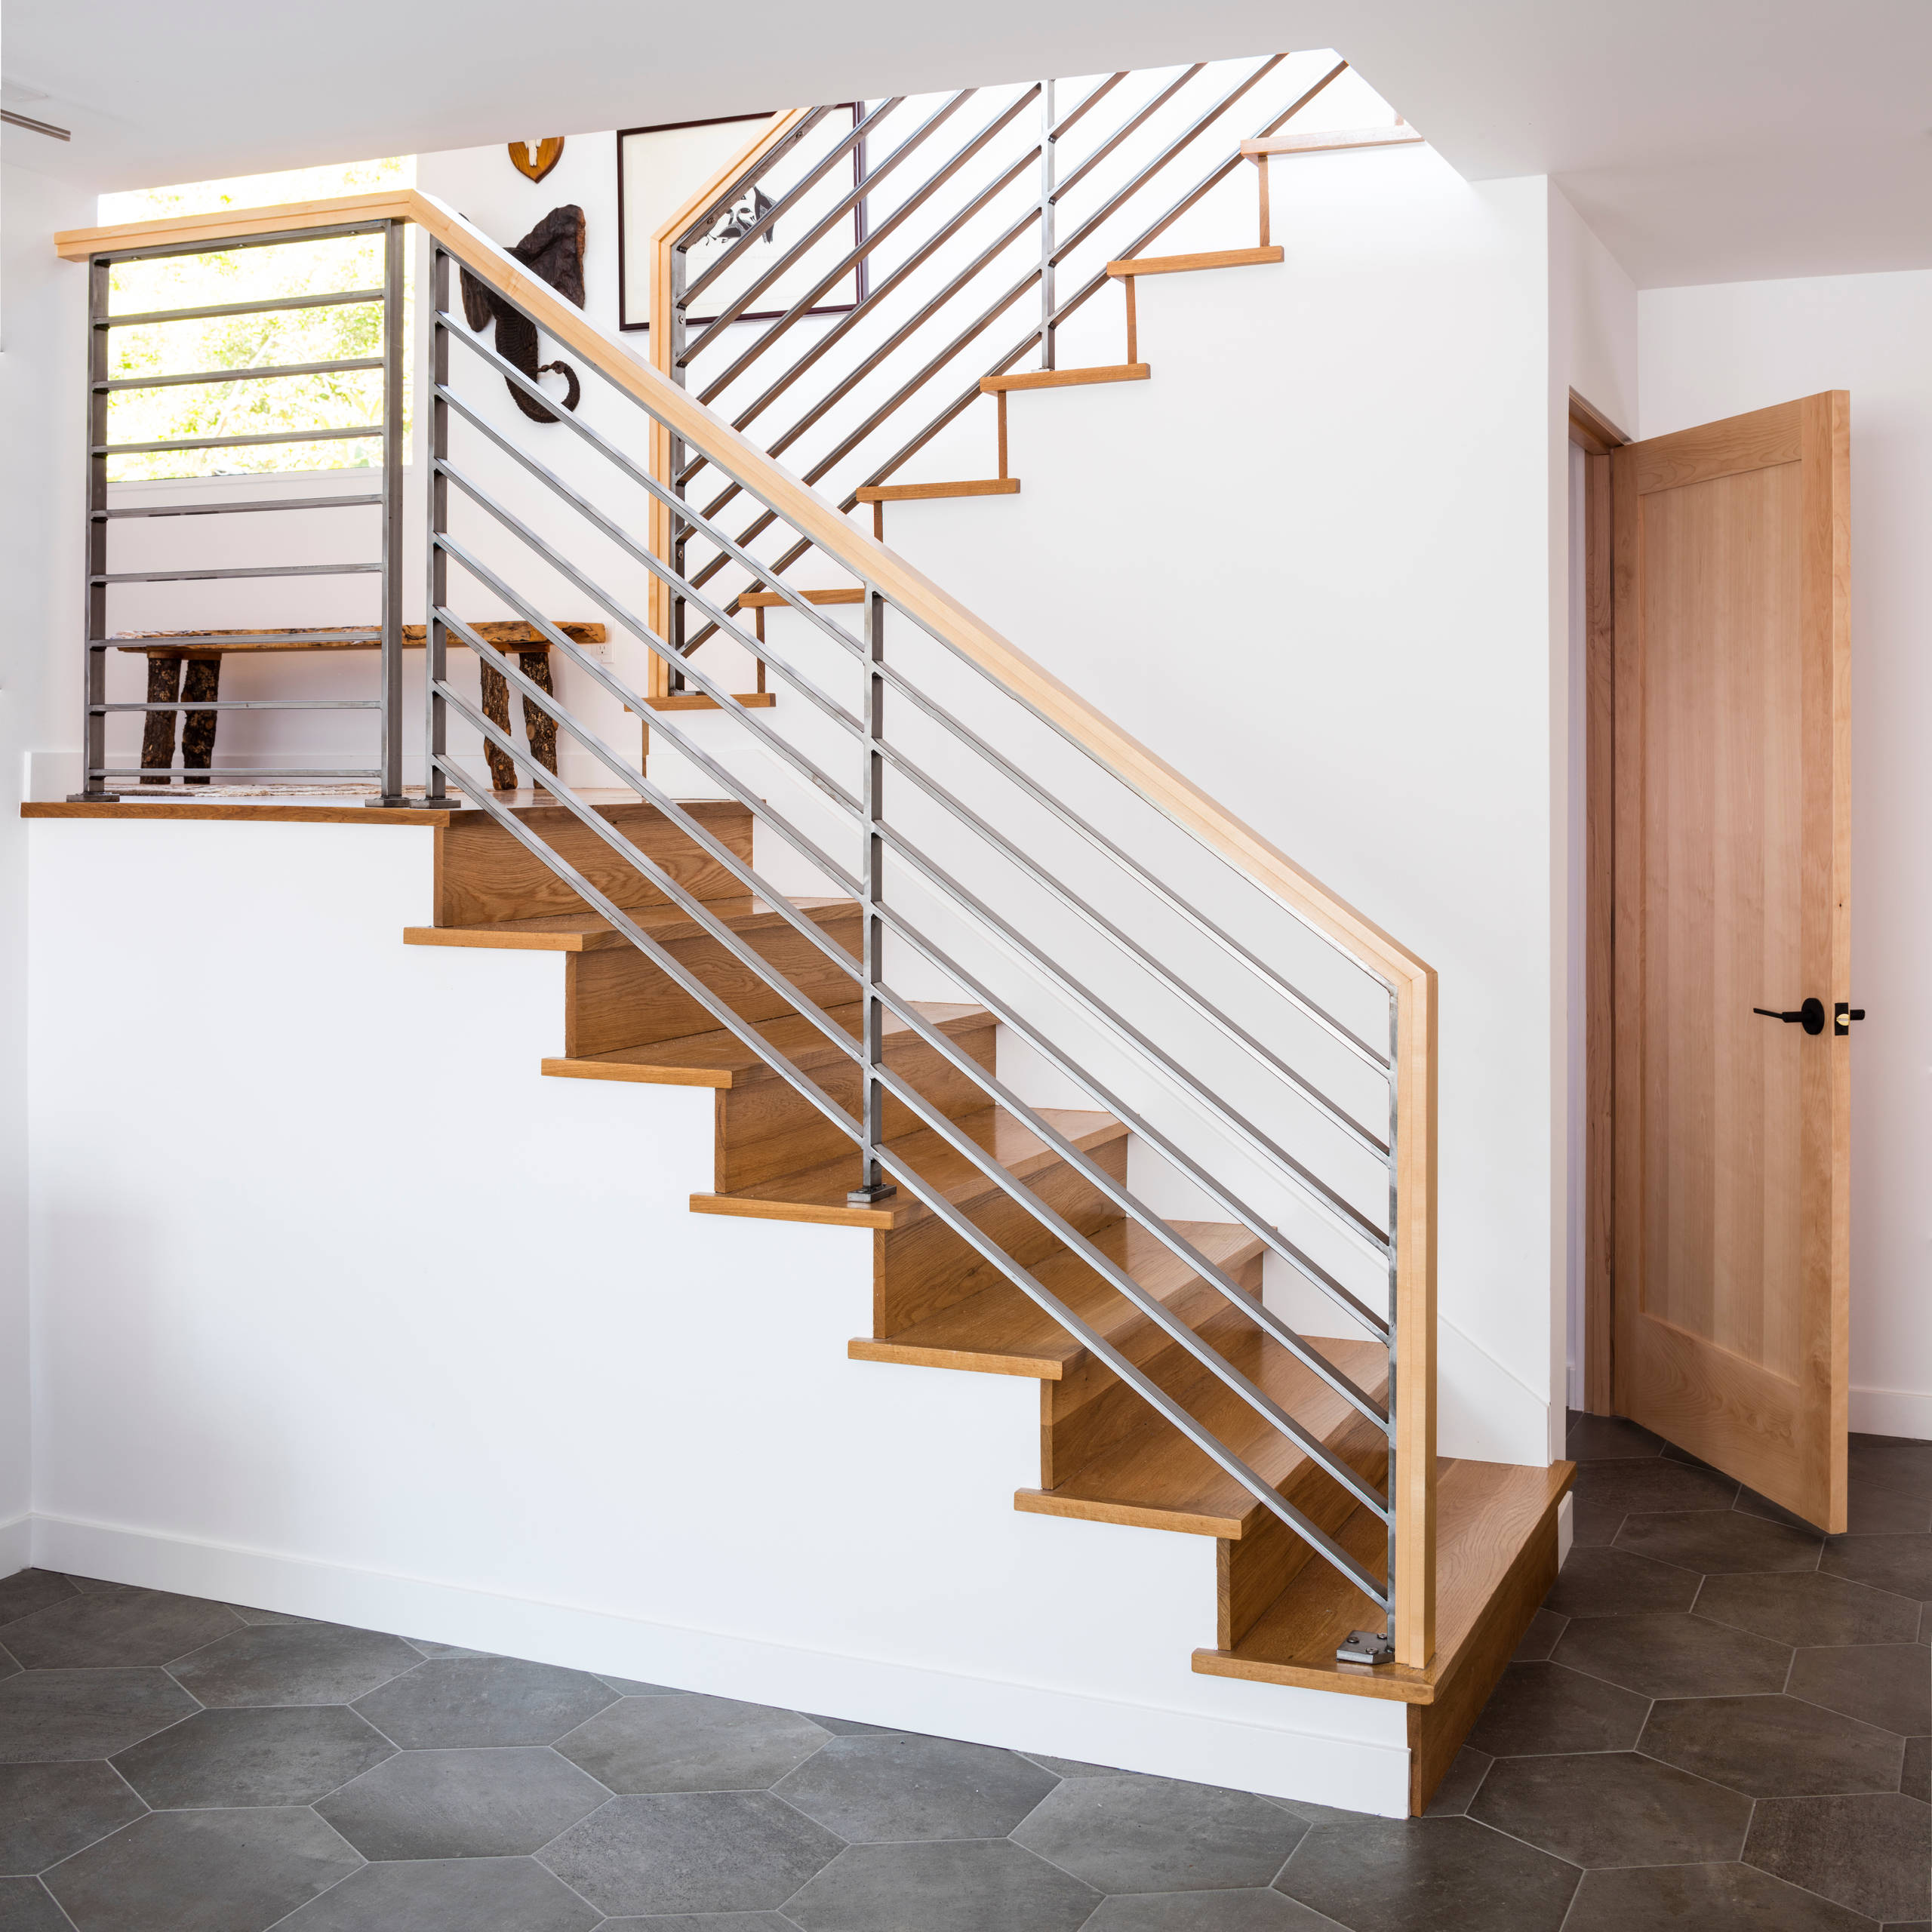 50 Amazing and Modern Staircase Ideas and Designs — RenoGuide - Australian  Renovation Ideas and Inspiration